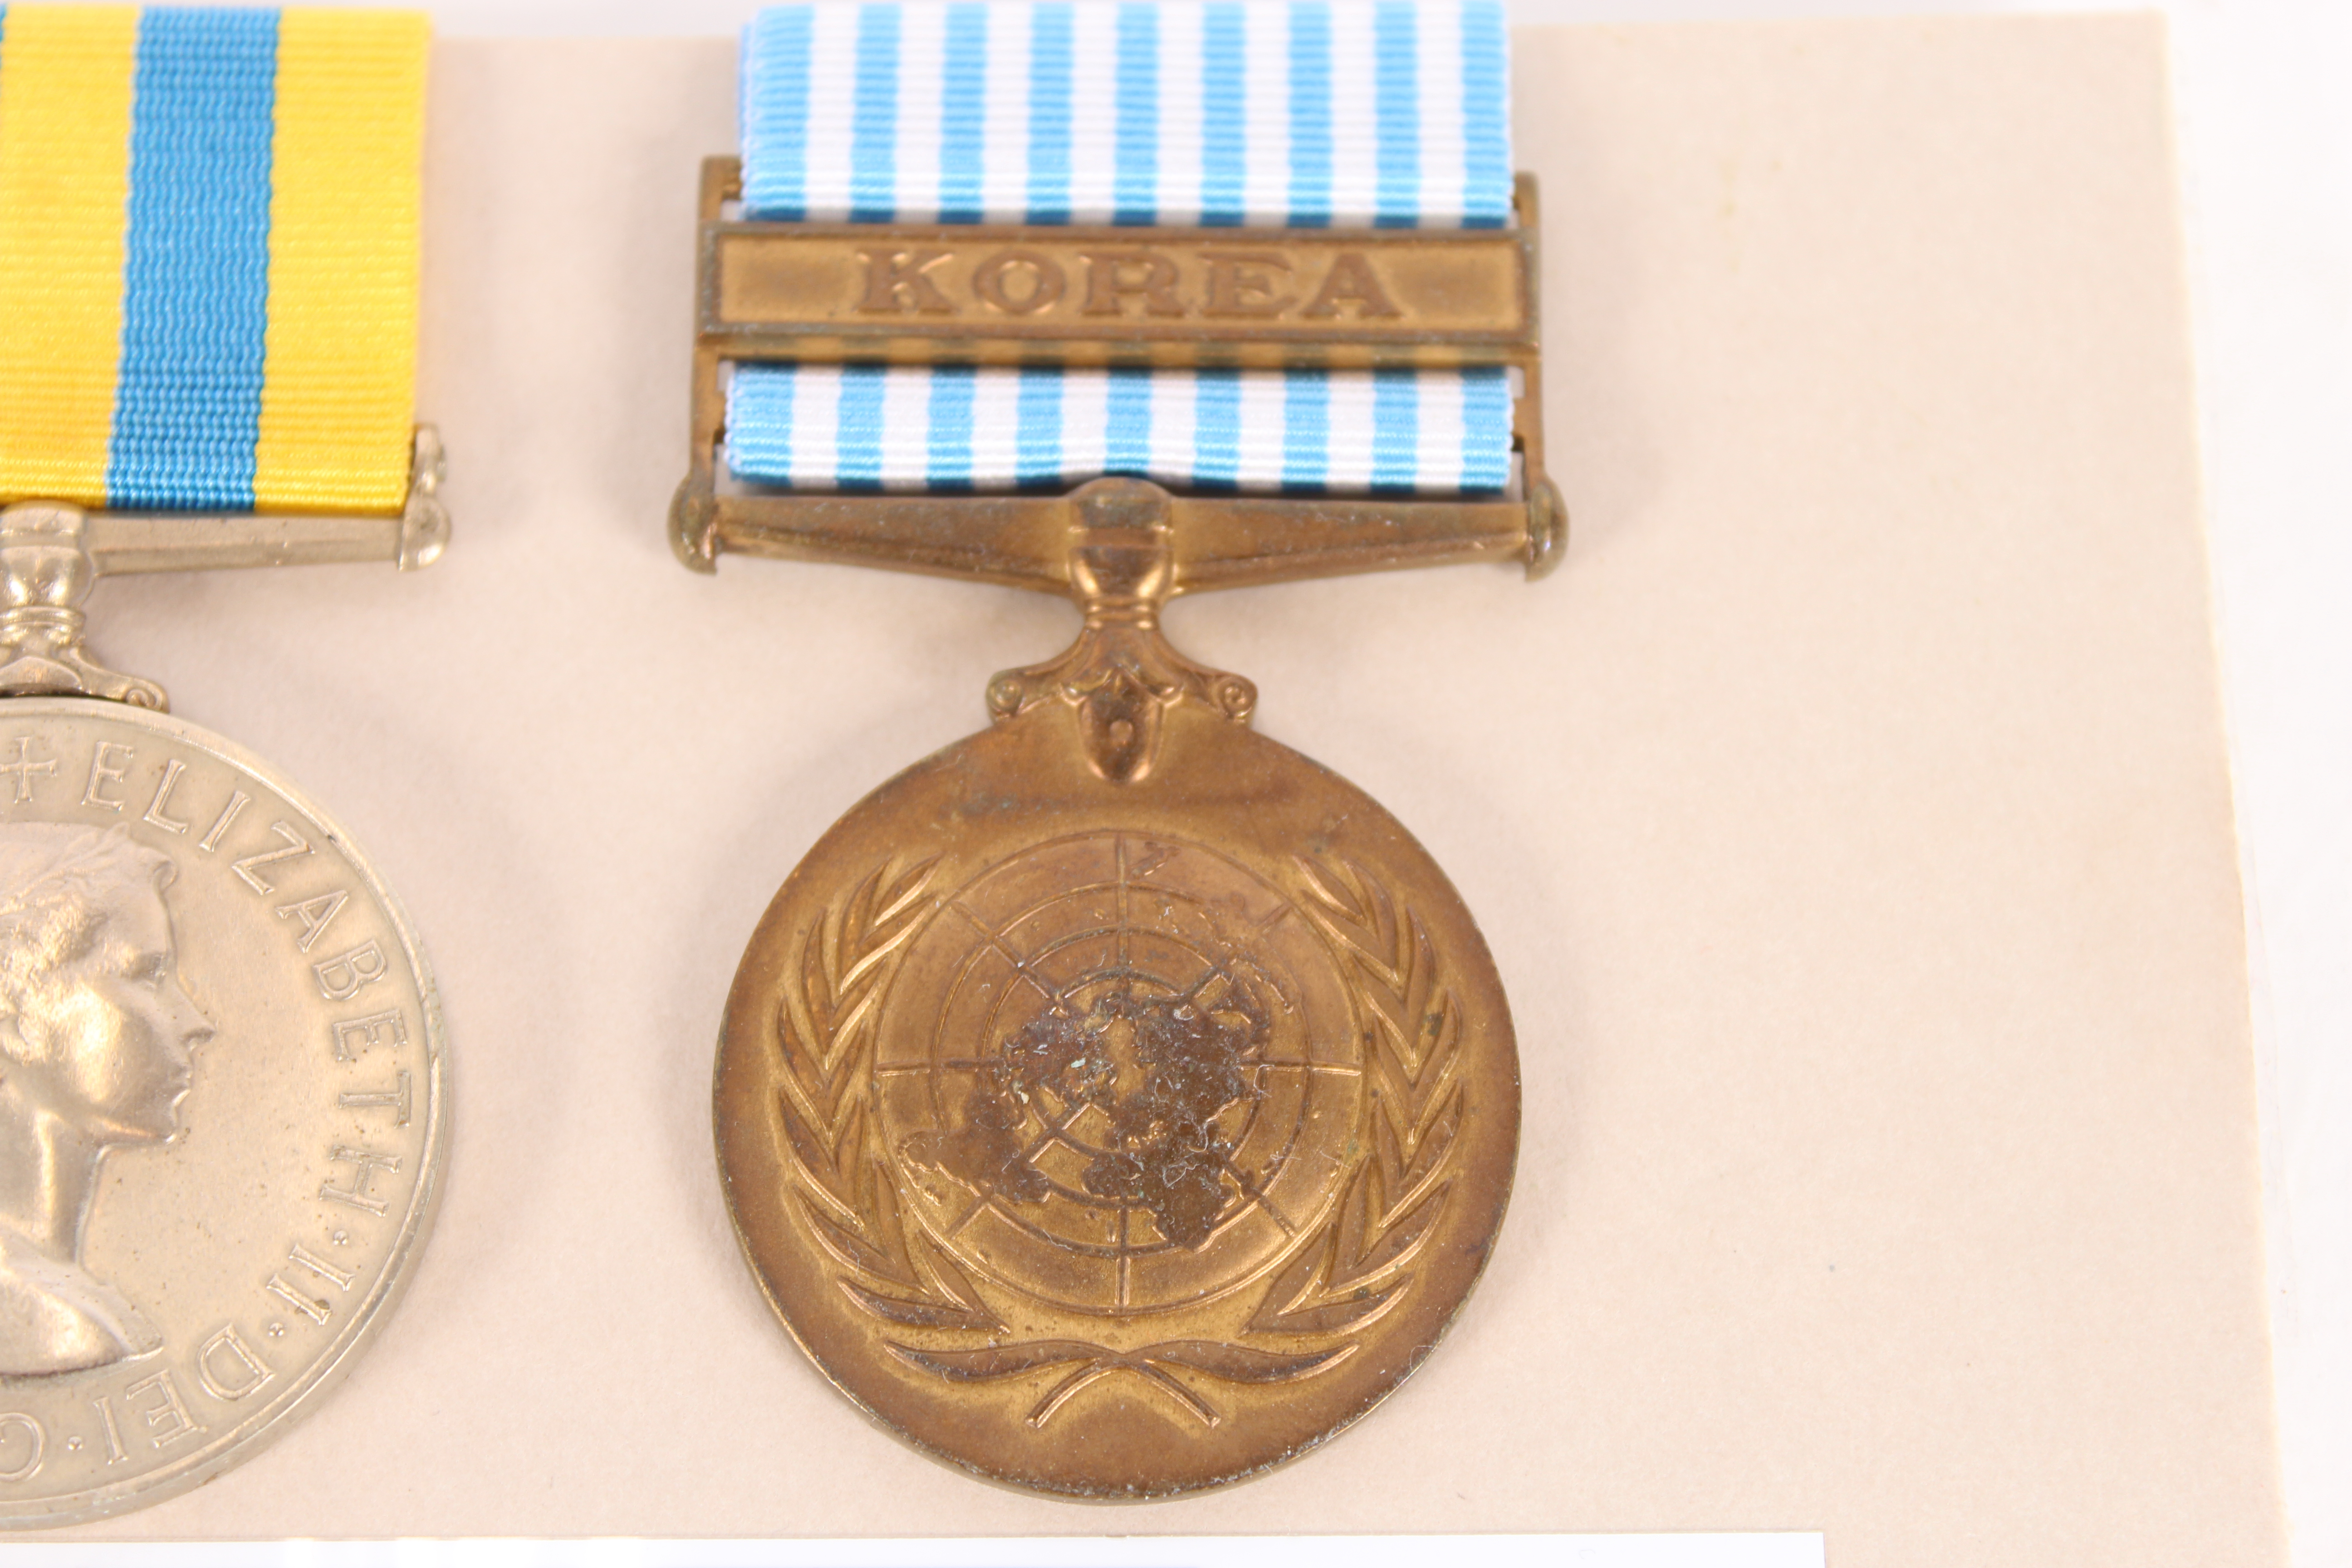 Two Korean medals to CSKX 8622719 D.H. Bowdidge Lm - Image 3 of 5